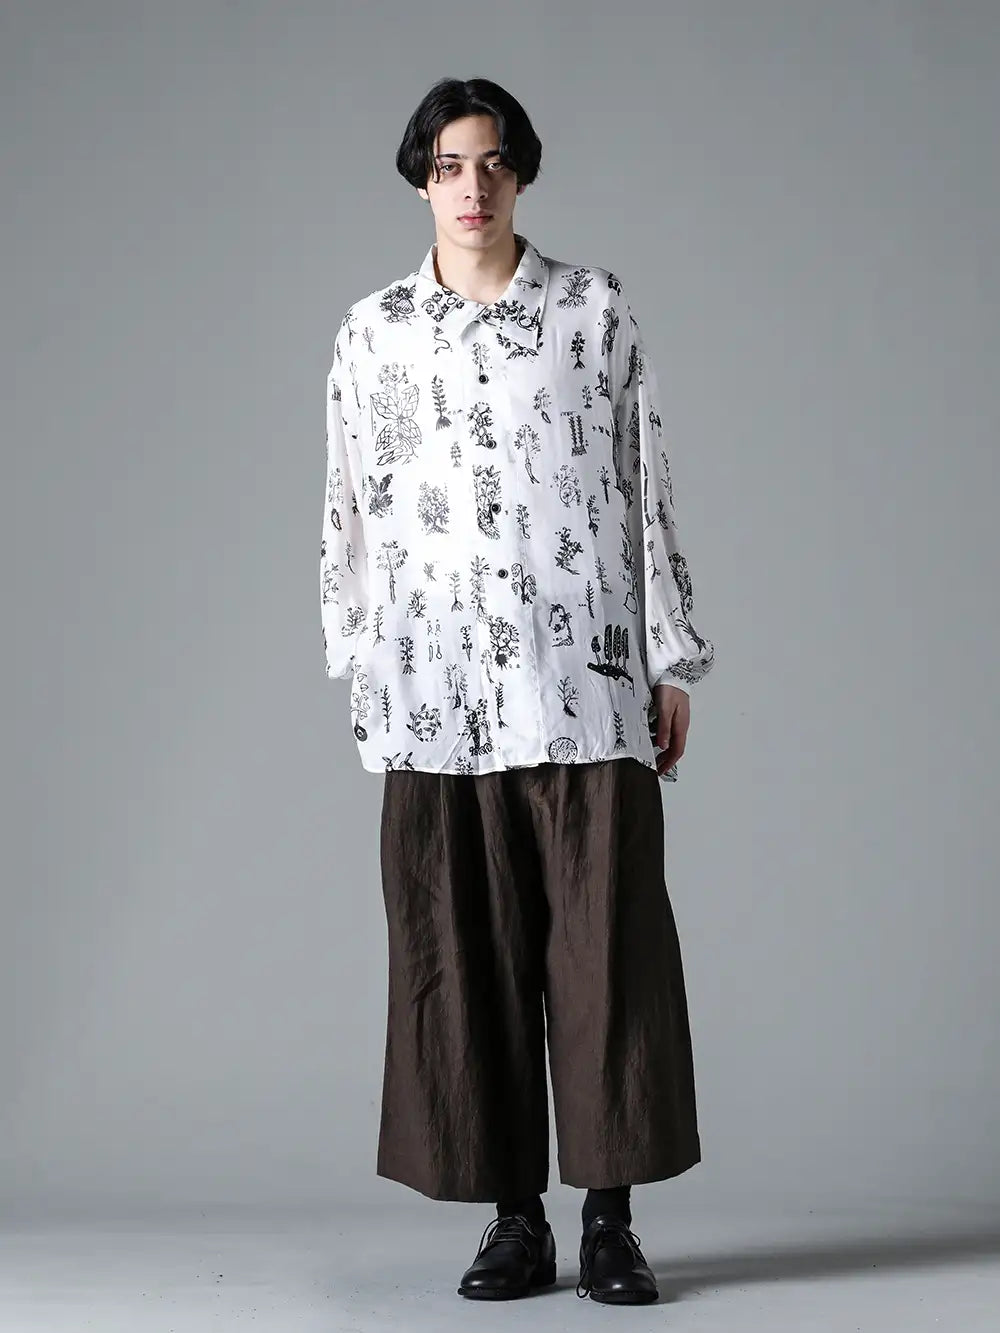 ZIGGY CHEN 24SS - Cropped trouser styles that will be suitable throughout summer. - PTS24M02-2 Chinese Medicine Print LS Shirt - 0M2410509 Pleated Extra Wide Leg Trousers - 992x-black-guidi Classic Derby Shoes Laced Up Single Sole - Horse Full Grain - 992X Black 1-005